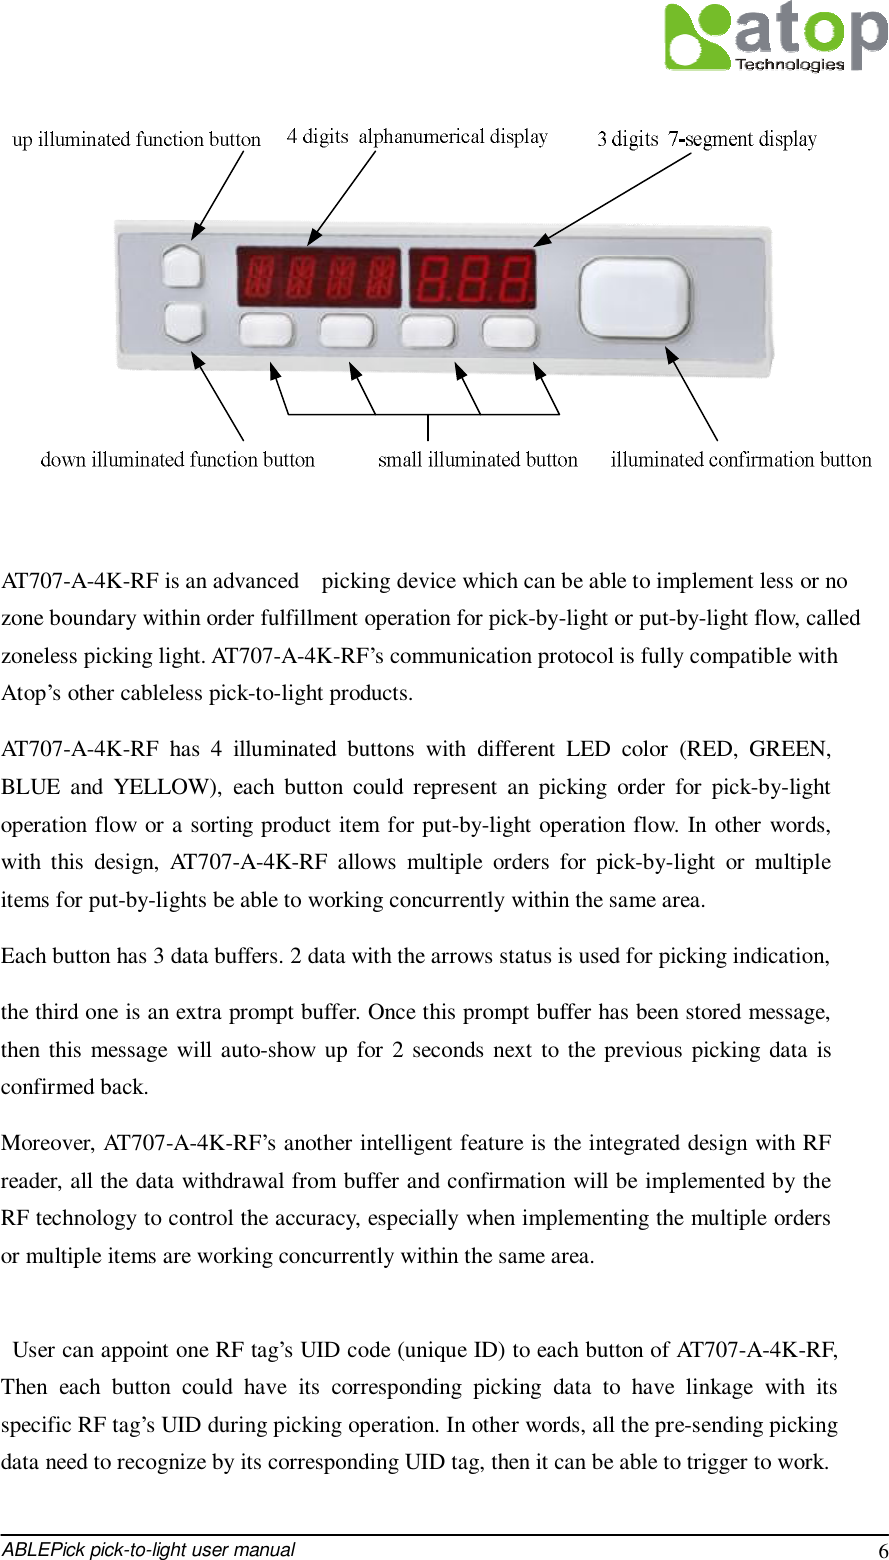  ABLEPick pick-to-light user manual 6     AT707-A-4K-RF is an advanced  picking device which can be able to implement less or no zone boundary within order fulfillment operation for pick-by-light or put-by-light flow, called zoneless picking light. AT707-A-4K-RF’s communication protocol is fully compatible with Atop’s other cableless pick-to-light products.  AT707-A-4K-RF has 4 illuminated buttons with different LED color (RED, GREEN, BLUE and YELLOW), each button could represent an picking order for pick-by-light operation flow or a sorting product item for put-by-light operation flow. In other words, with this design, AT707-A-4K-RF allows multiple orders for pick-by-light or multiple items for put-by-lights be able to working concurrently within the same area.  Each button has 3 data buffers. 2 data with the arrows status is used for picking indication,  the third one is an extra prompt buffer. Once this prompt buffer has been stored message, then this message will auto-show up for 2 seconds next to the previous picking data is confirmed back.  Moreover, AT707-A-4K-RF’s another intelligent feature is the integrated design with RF reader, all the data withdrawal from buffer and confirmation will be implemented by the RF technology to control the accuracy, especially when implementing the multiple orders or multiple items are working concurrently within the same area.      User can appoint one RF tag’s UID code (unique ID) to each button of AT707-A-4K-RF, Then each button could have its corresponding picking data to have linkage with its specific RF tag’s UID during picking operation. In other words, all the pre-sending picking data need to recognize by its corresponding UID tag, then it can be able to trigger to work.   